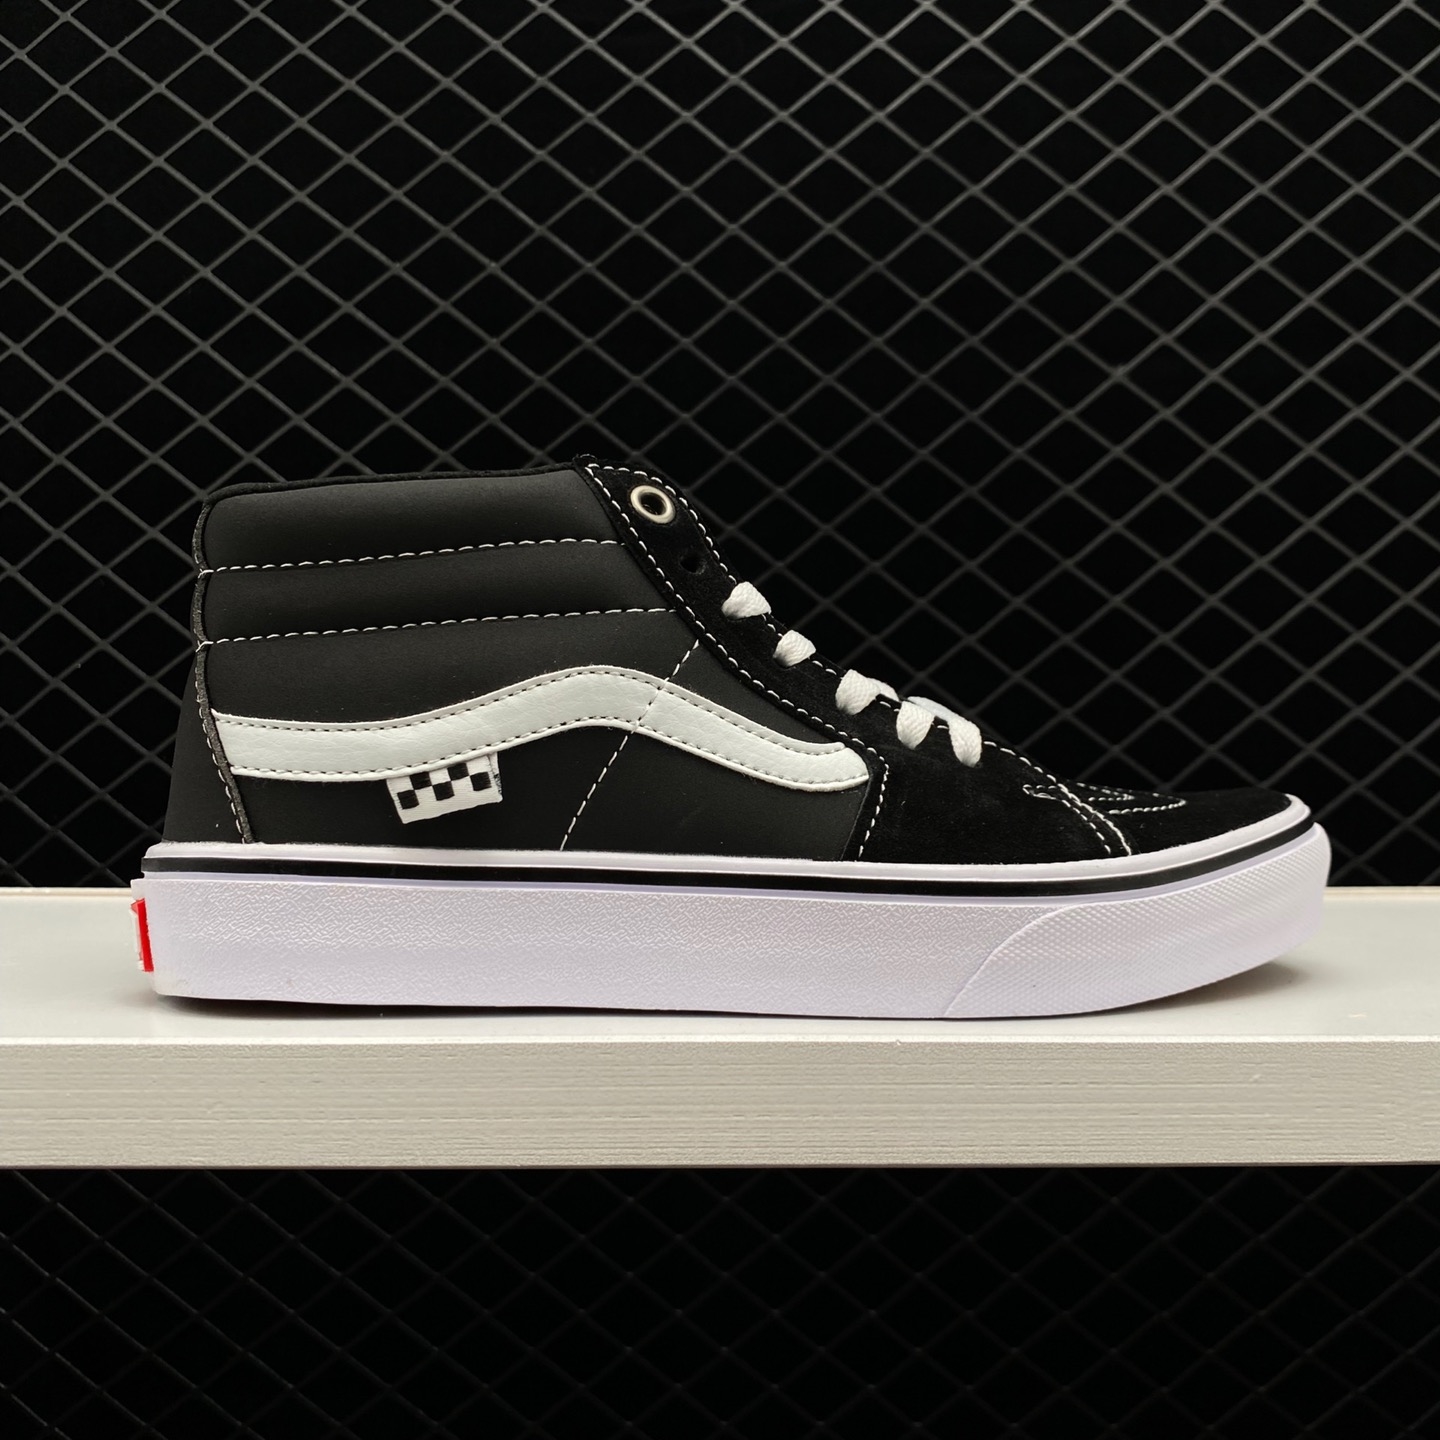 Vans Skate Grosso Mid 'Black' VN0A5FCG625 - Stylish and Durable Skate Shoes